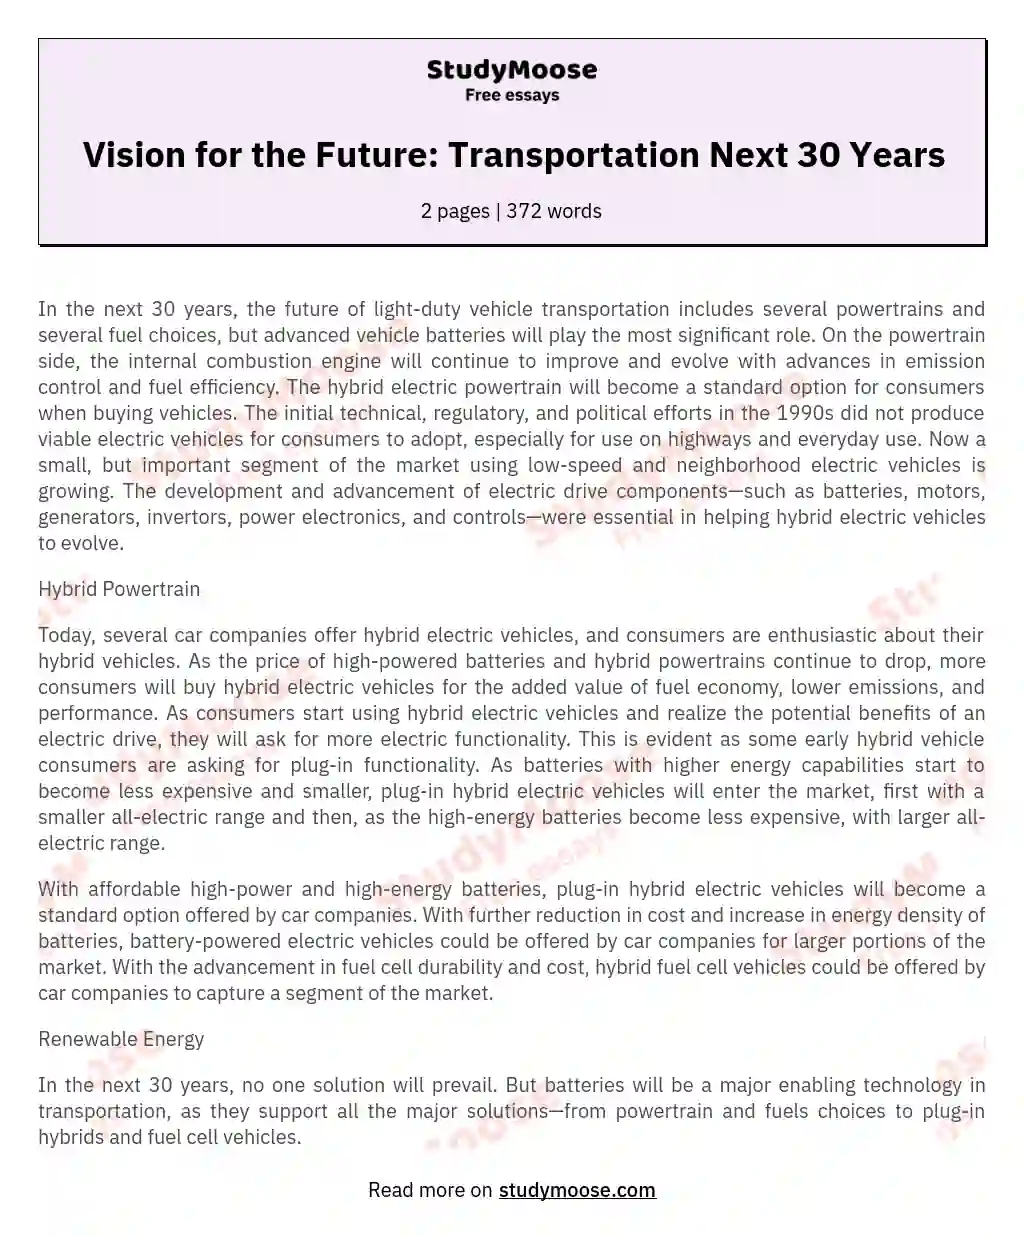 Vision for the Future: Transportation Next 30 Years essay